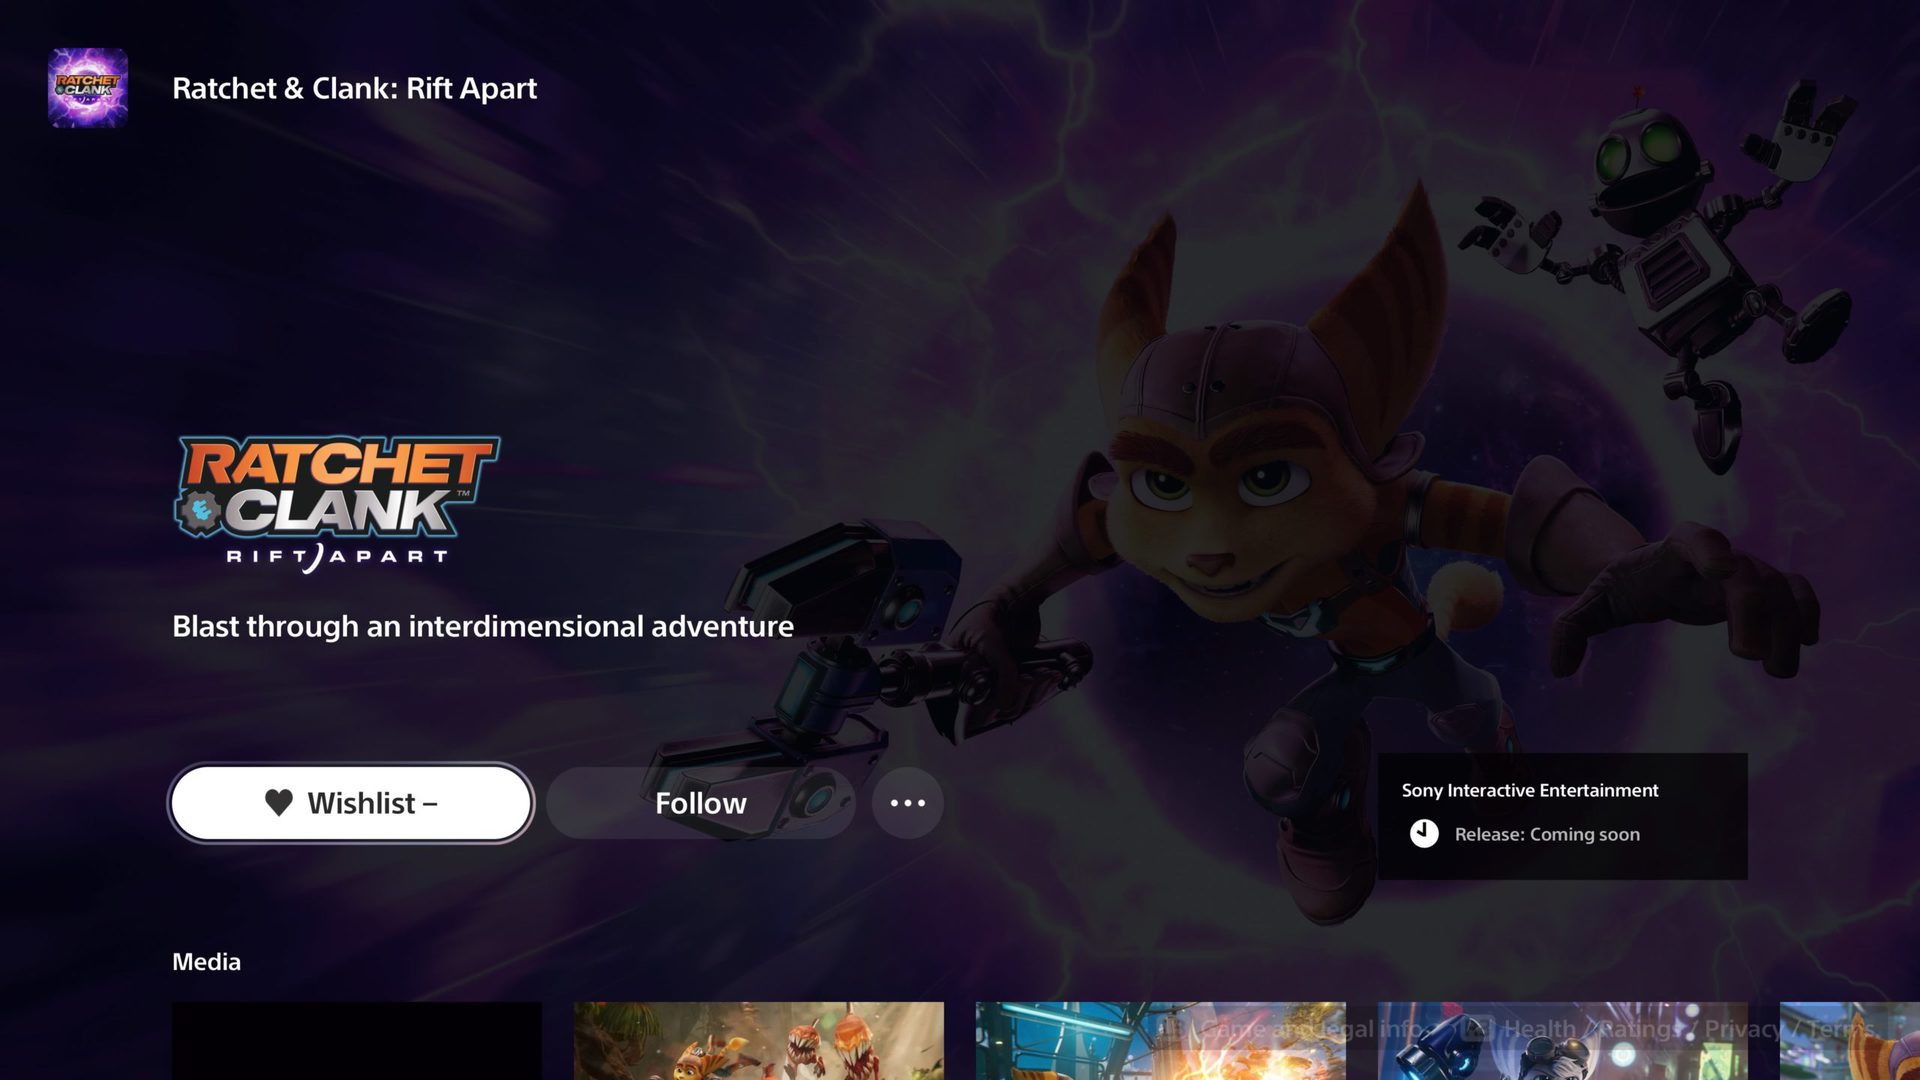 ratchet & clank store page ps5 wishlist